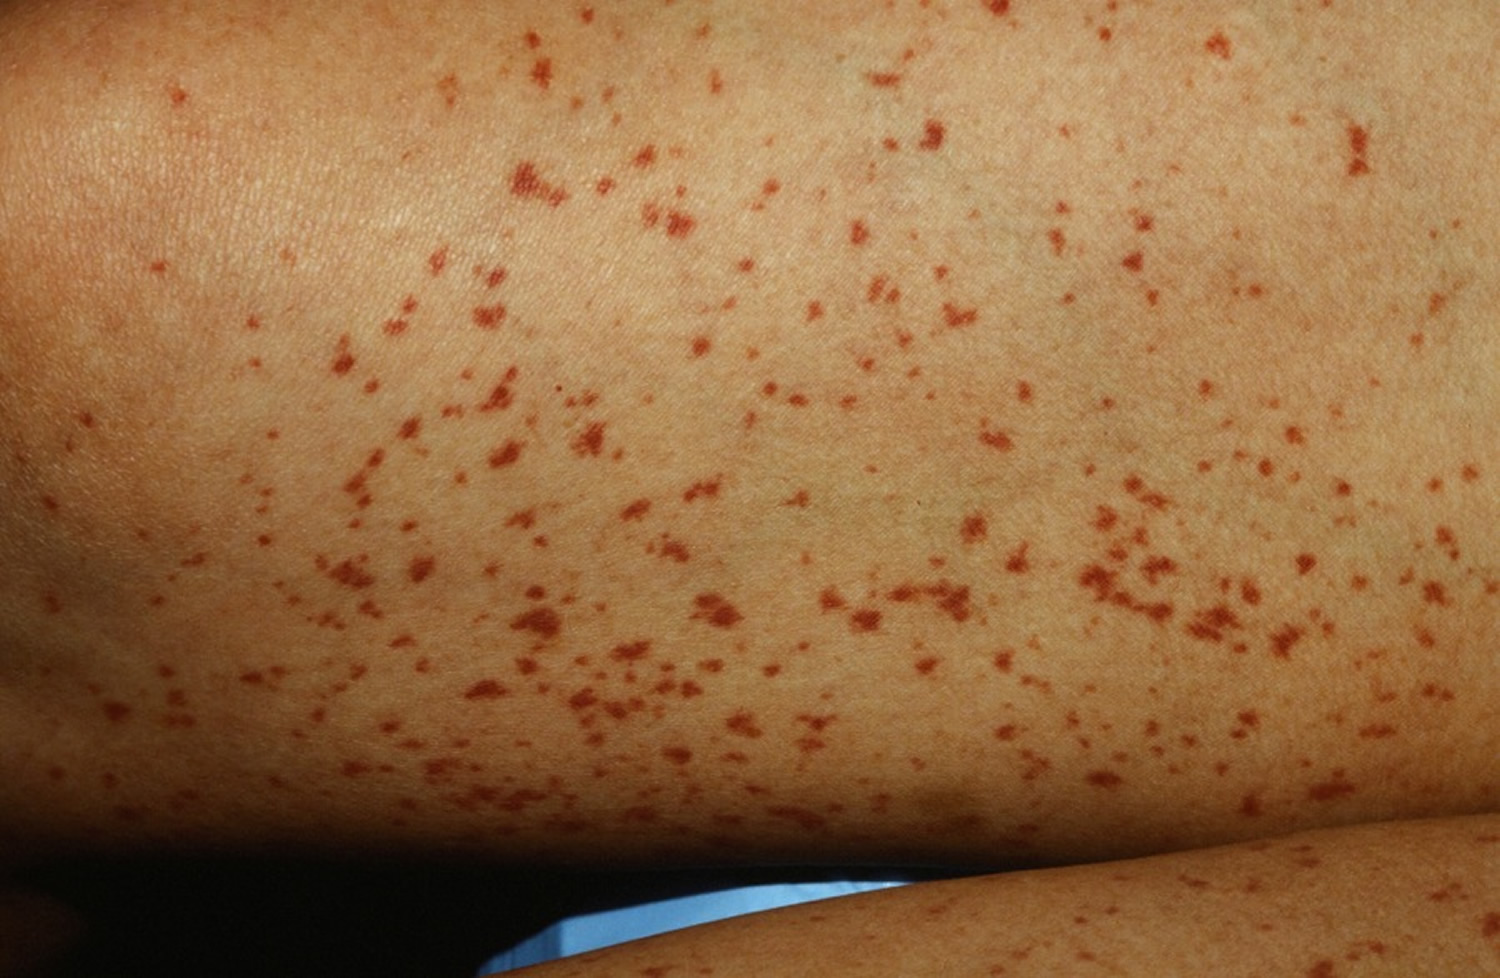 pinpoint red dots on skin lupus